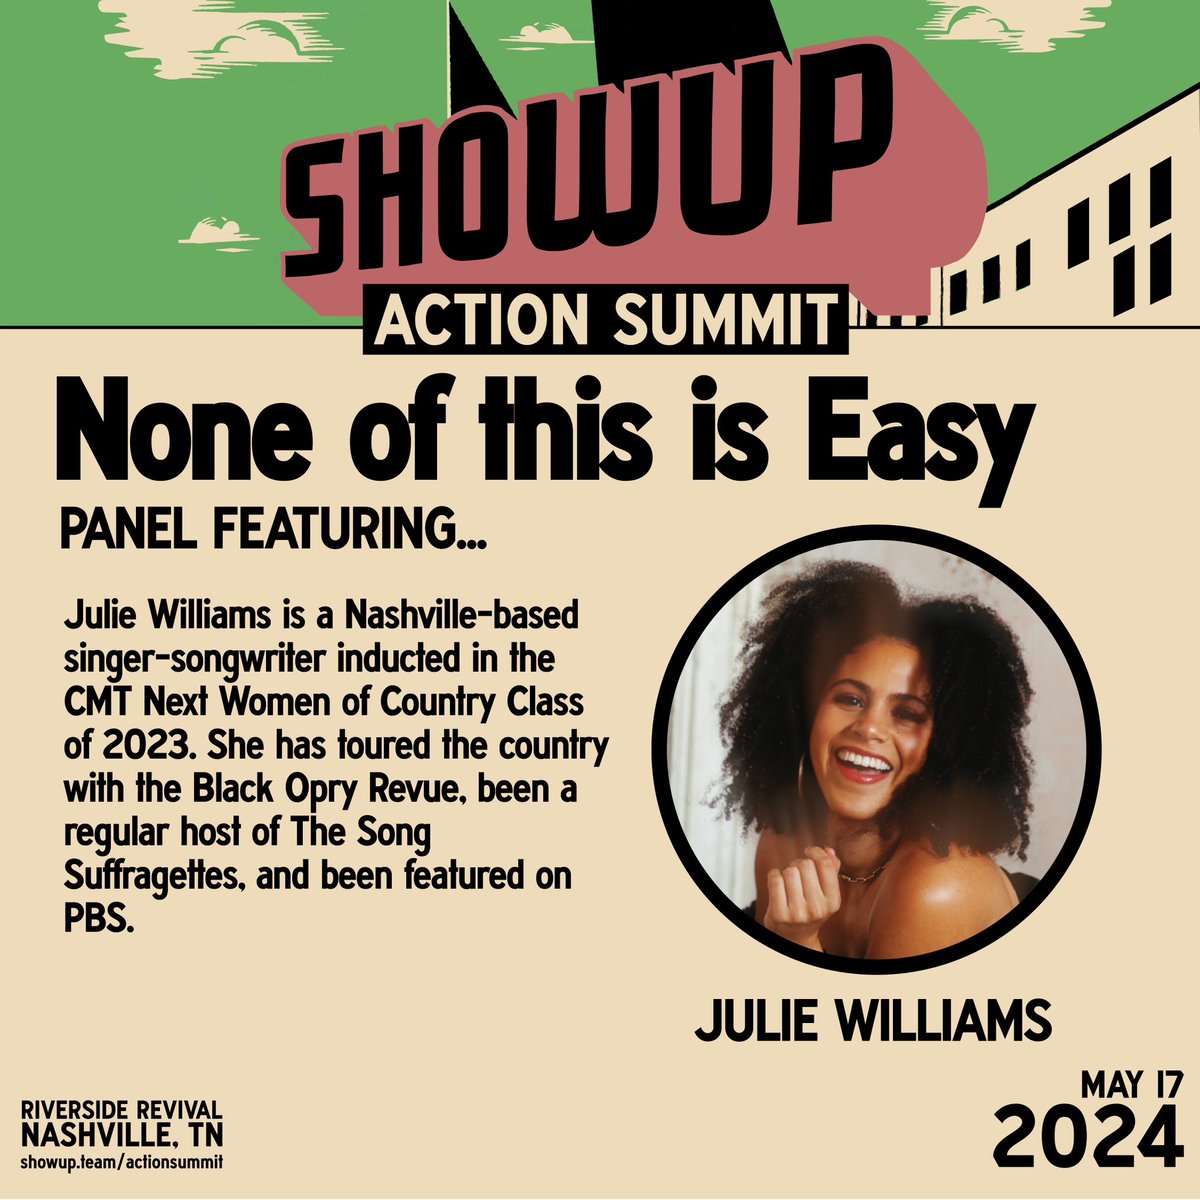 The Action Summit will feature “None of this is Easy,” a discussion between Grammy Nominated singer-songwriter @CassadeePope, Nashville born-and-based @morgxn, GRAMMY’s Chapter Board Governor @lachimusic, and CMT Next Women of Country class of 2023 @j_w_music.